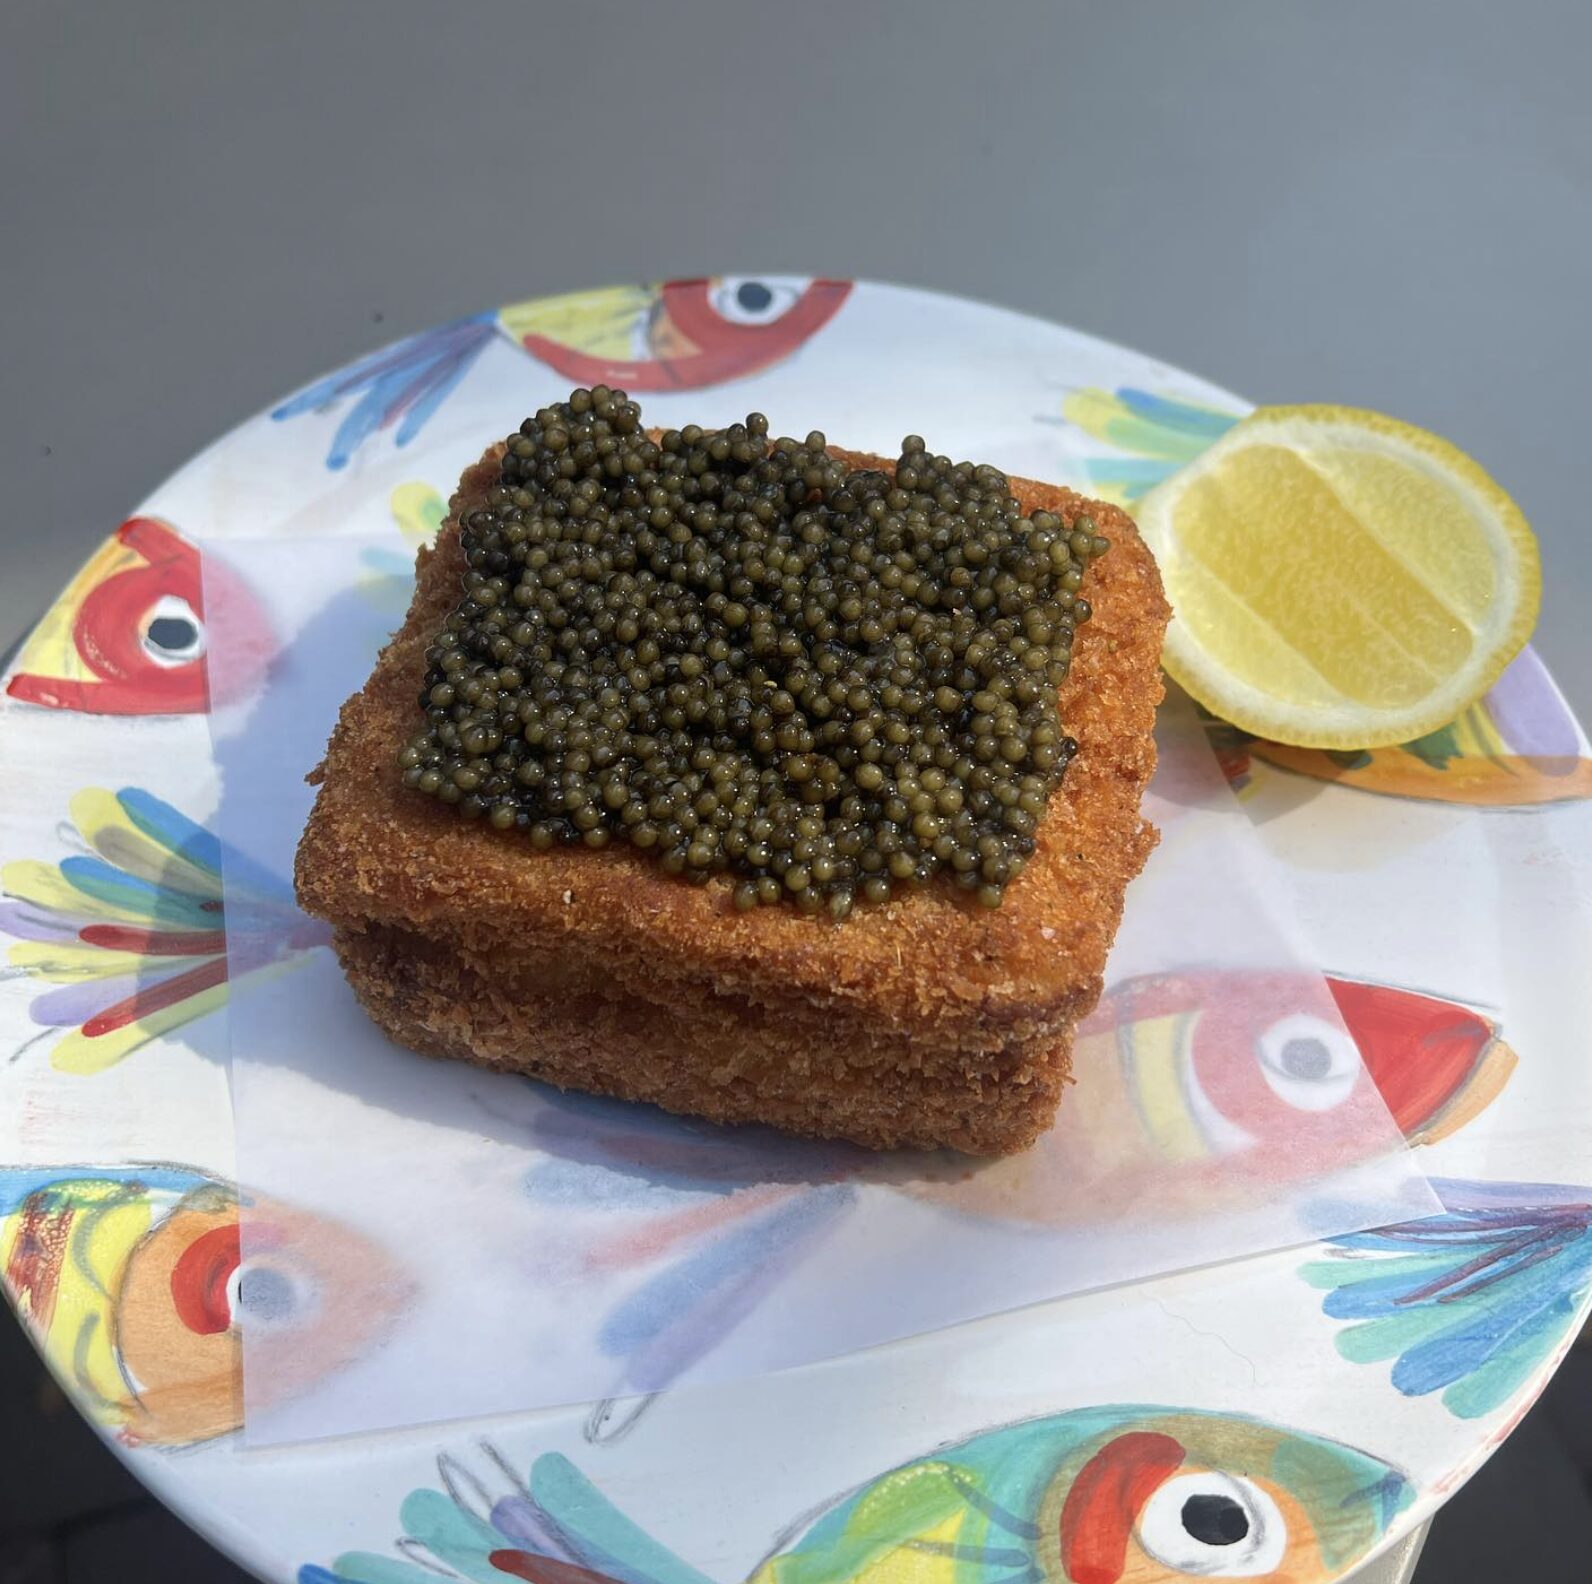 Costa Caviar on brioche served with lemon on a fish patterned plate